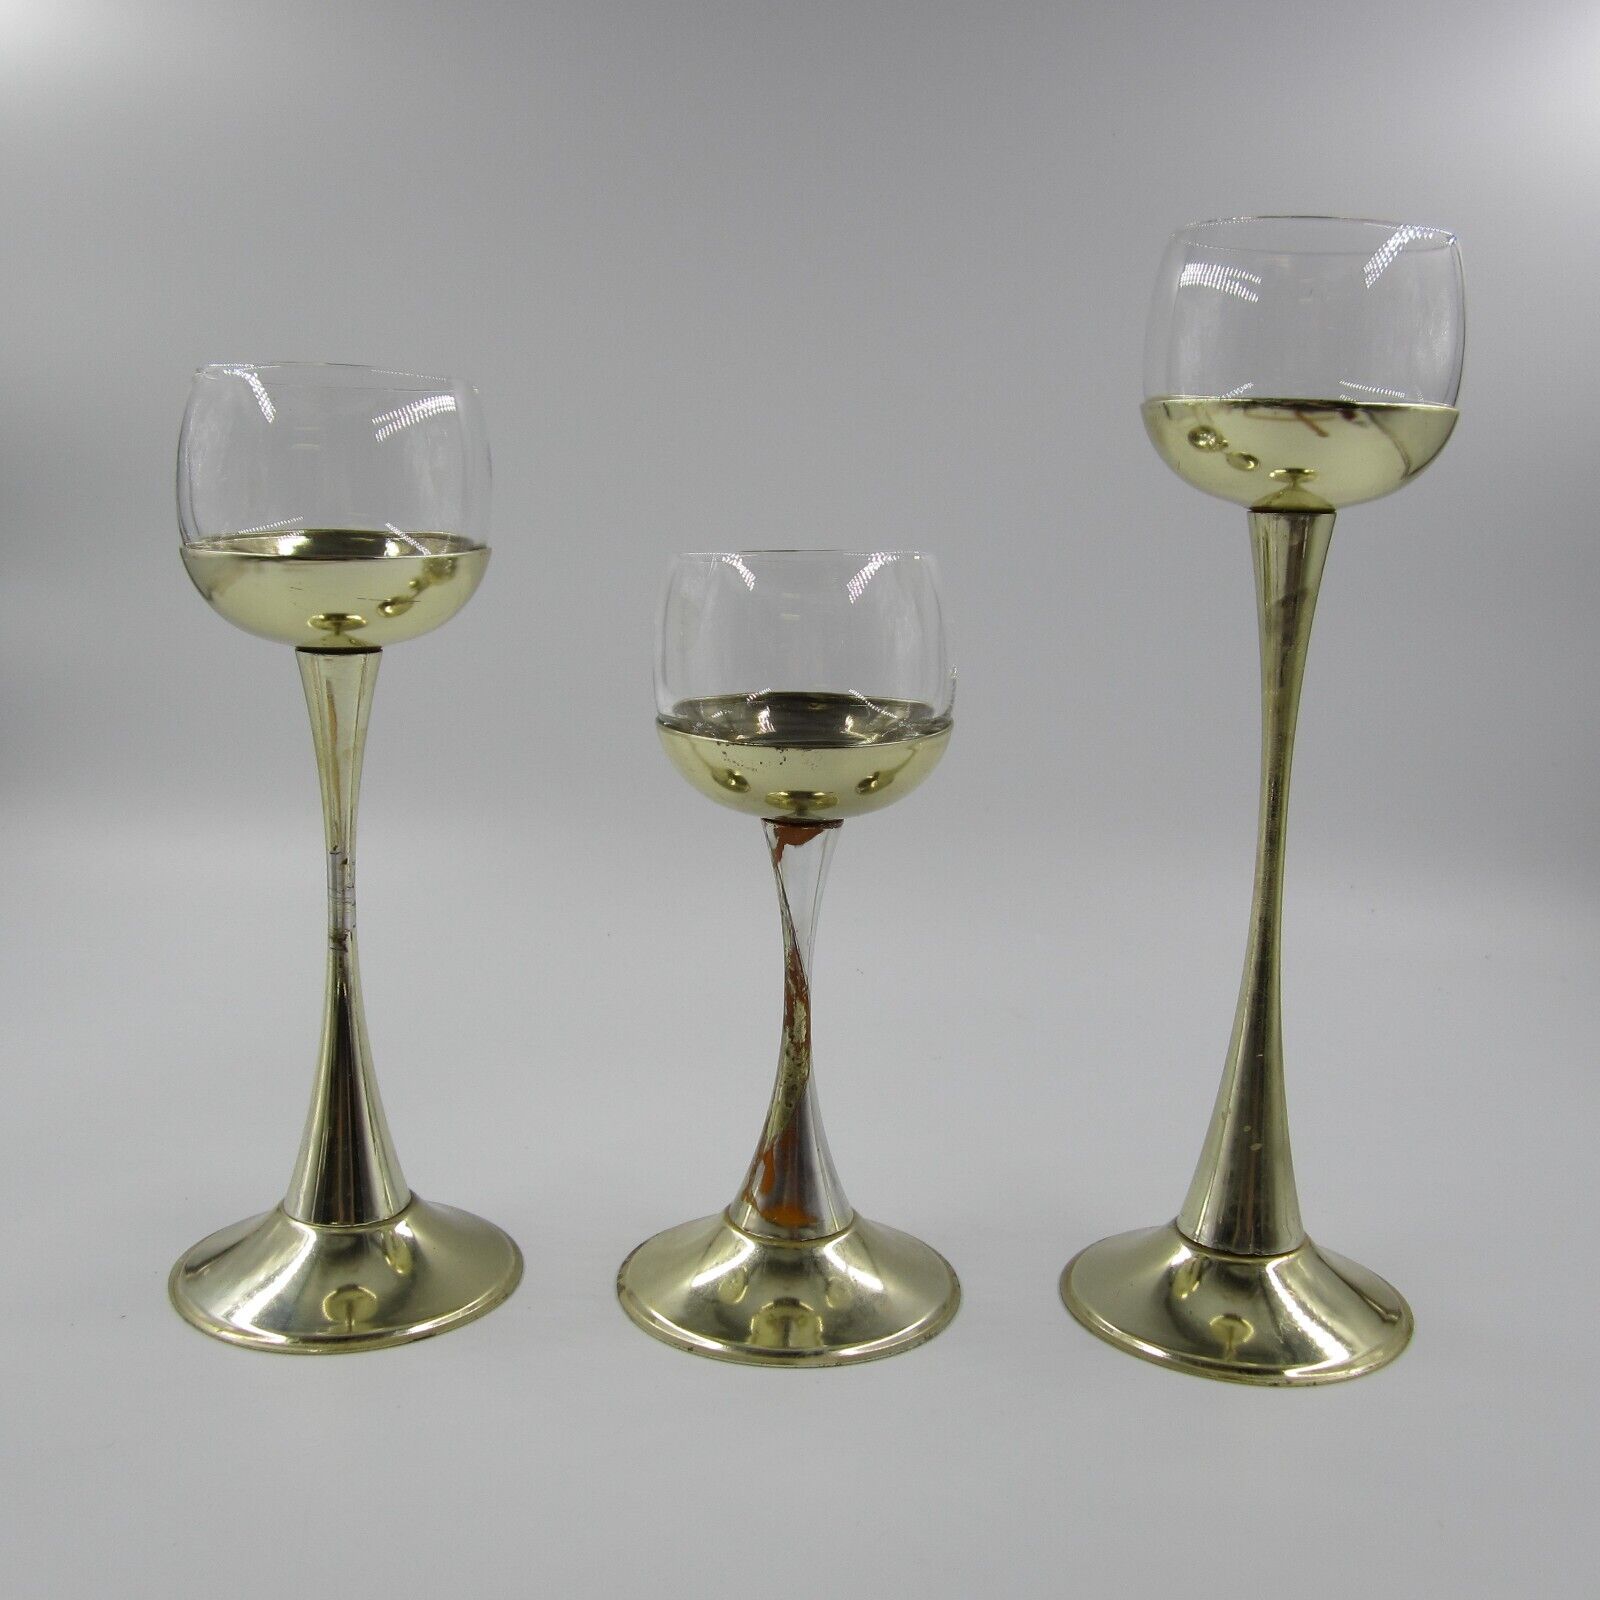 Unique Vintage Set of 3 Mid Century Modern Teired Votive Candle Holders 